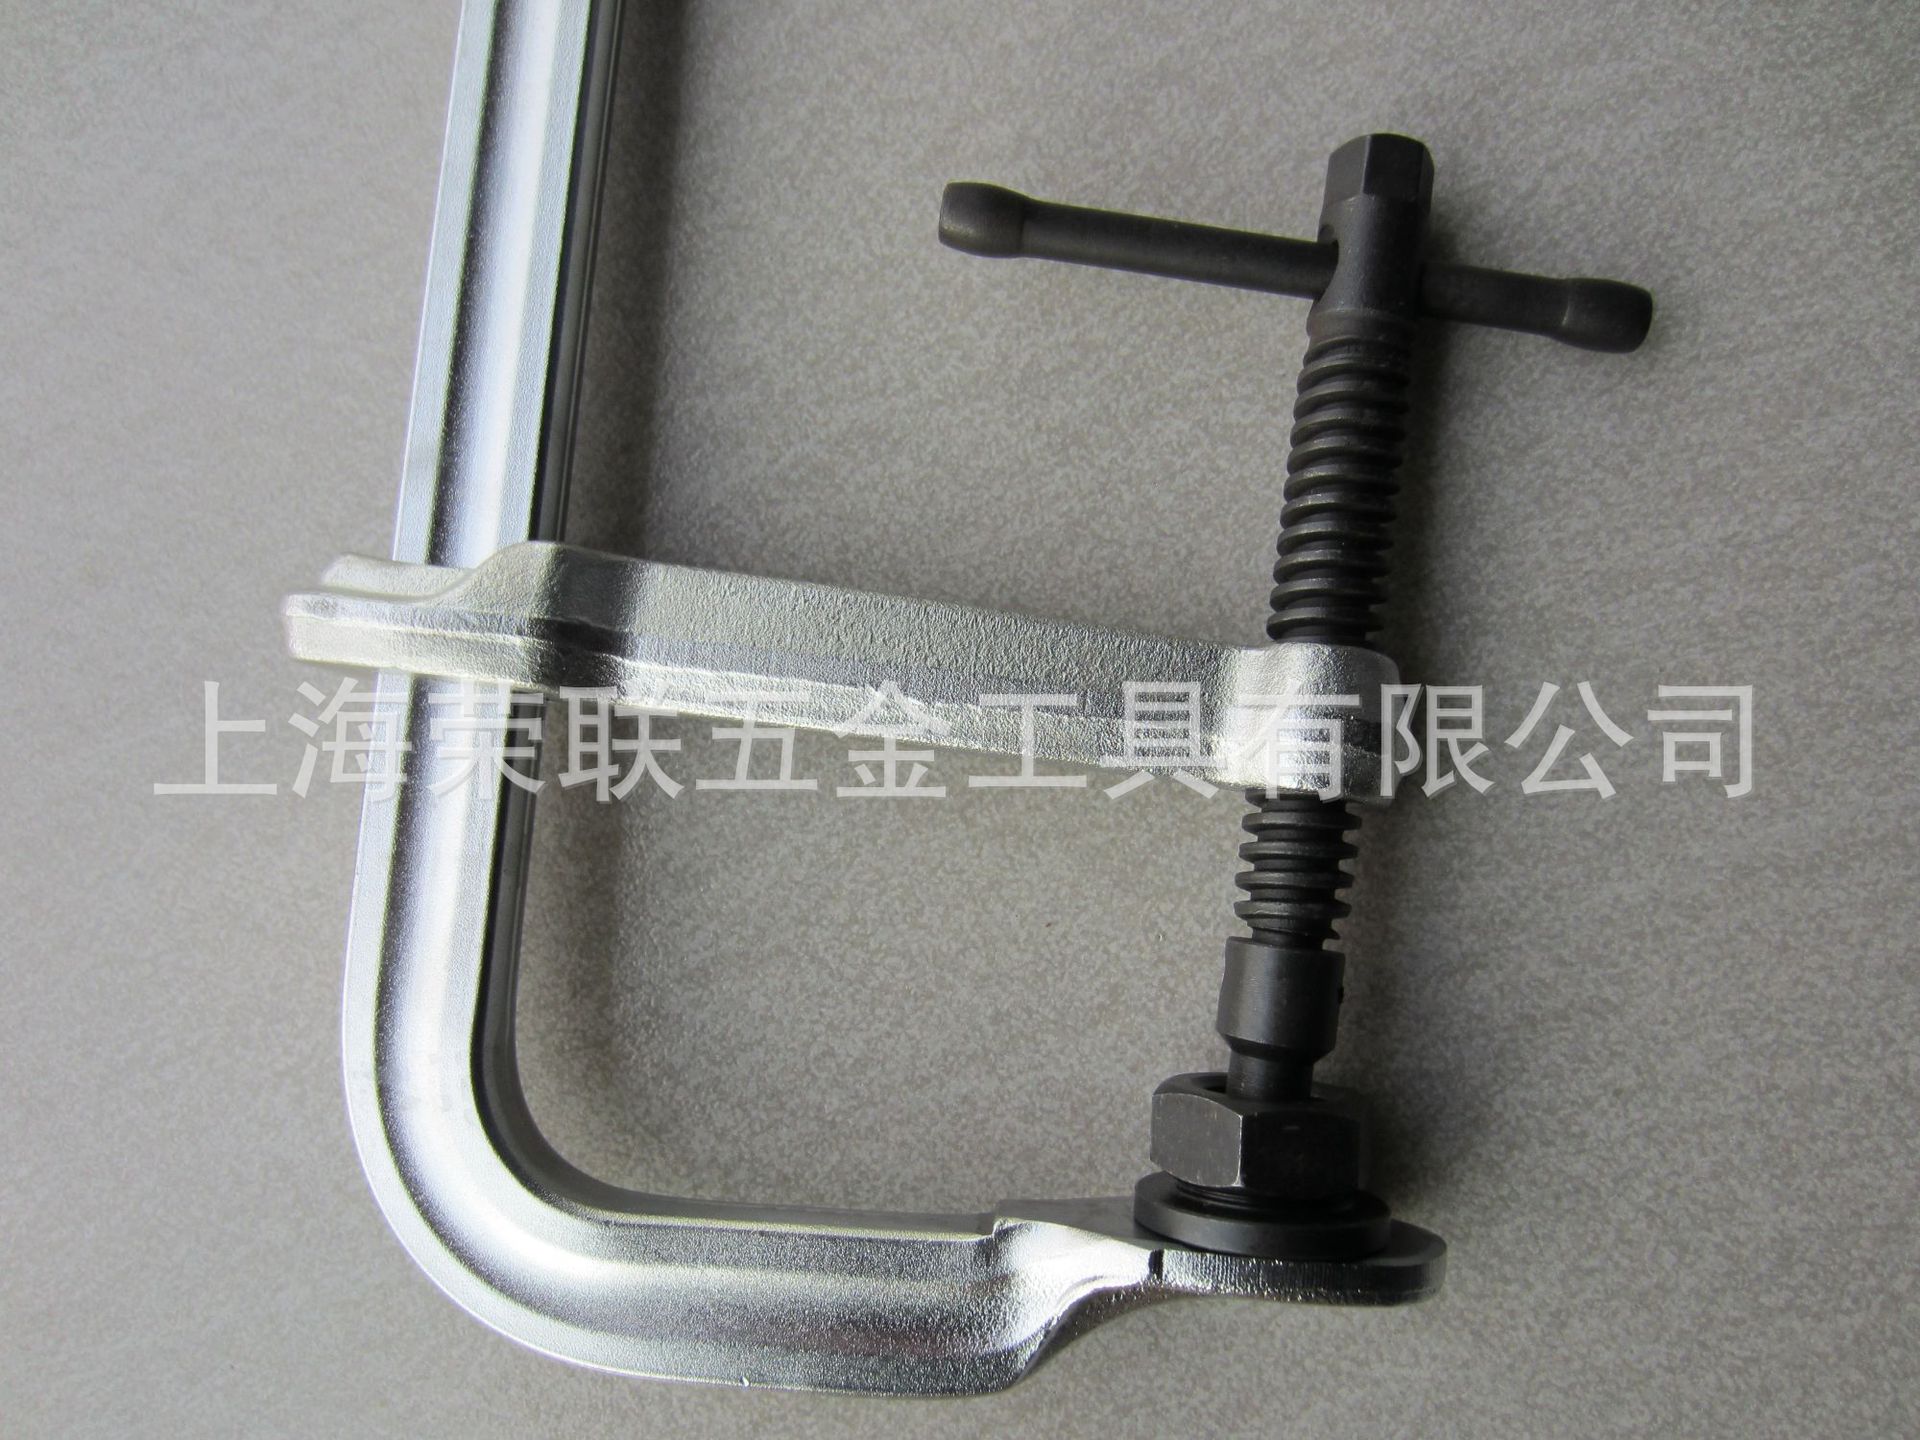 Forging Heavy fixture Heavy Three-piece Suite Heavy fast guide 29.7*14.3 Heavy F clip